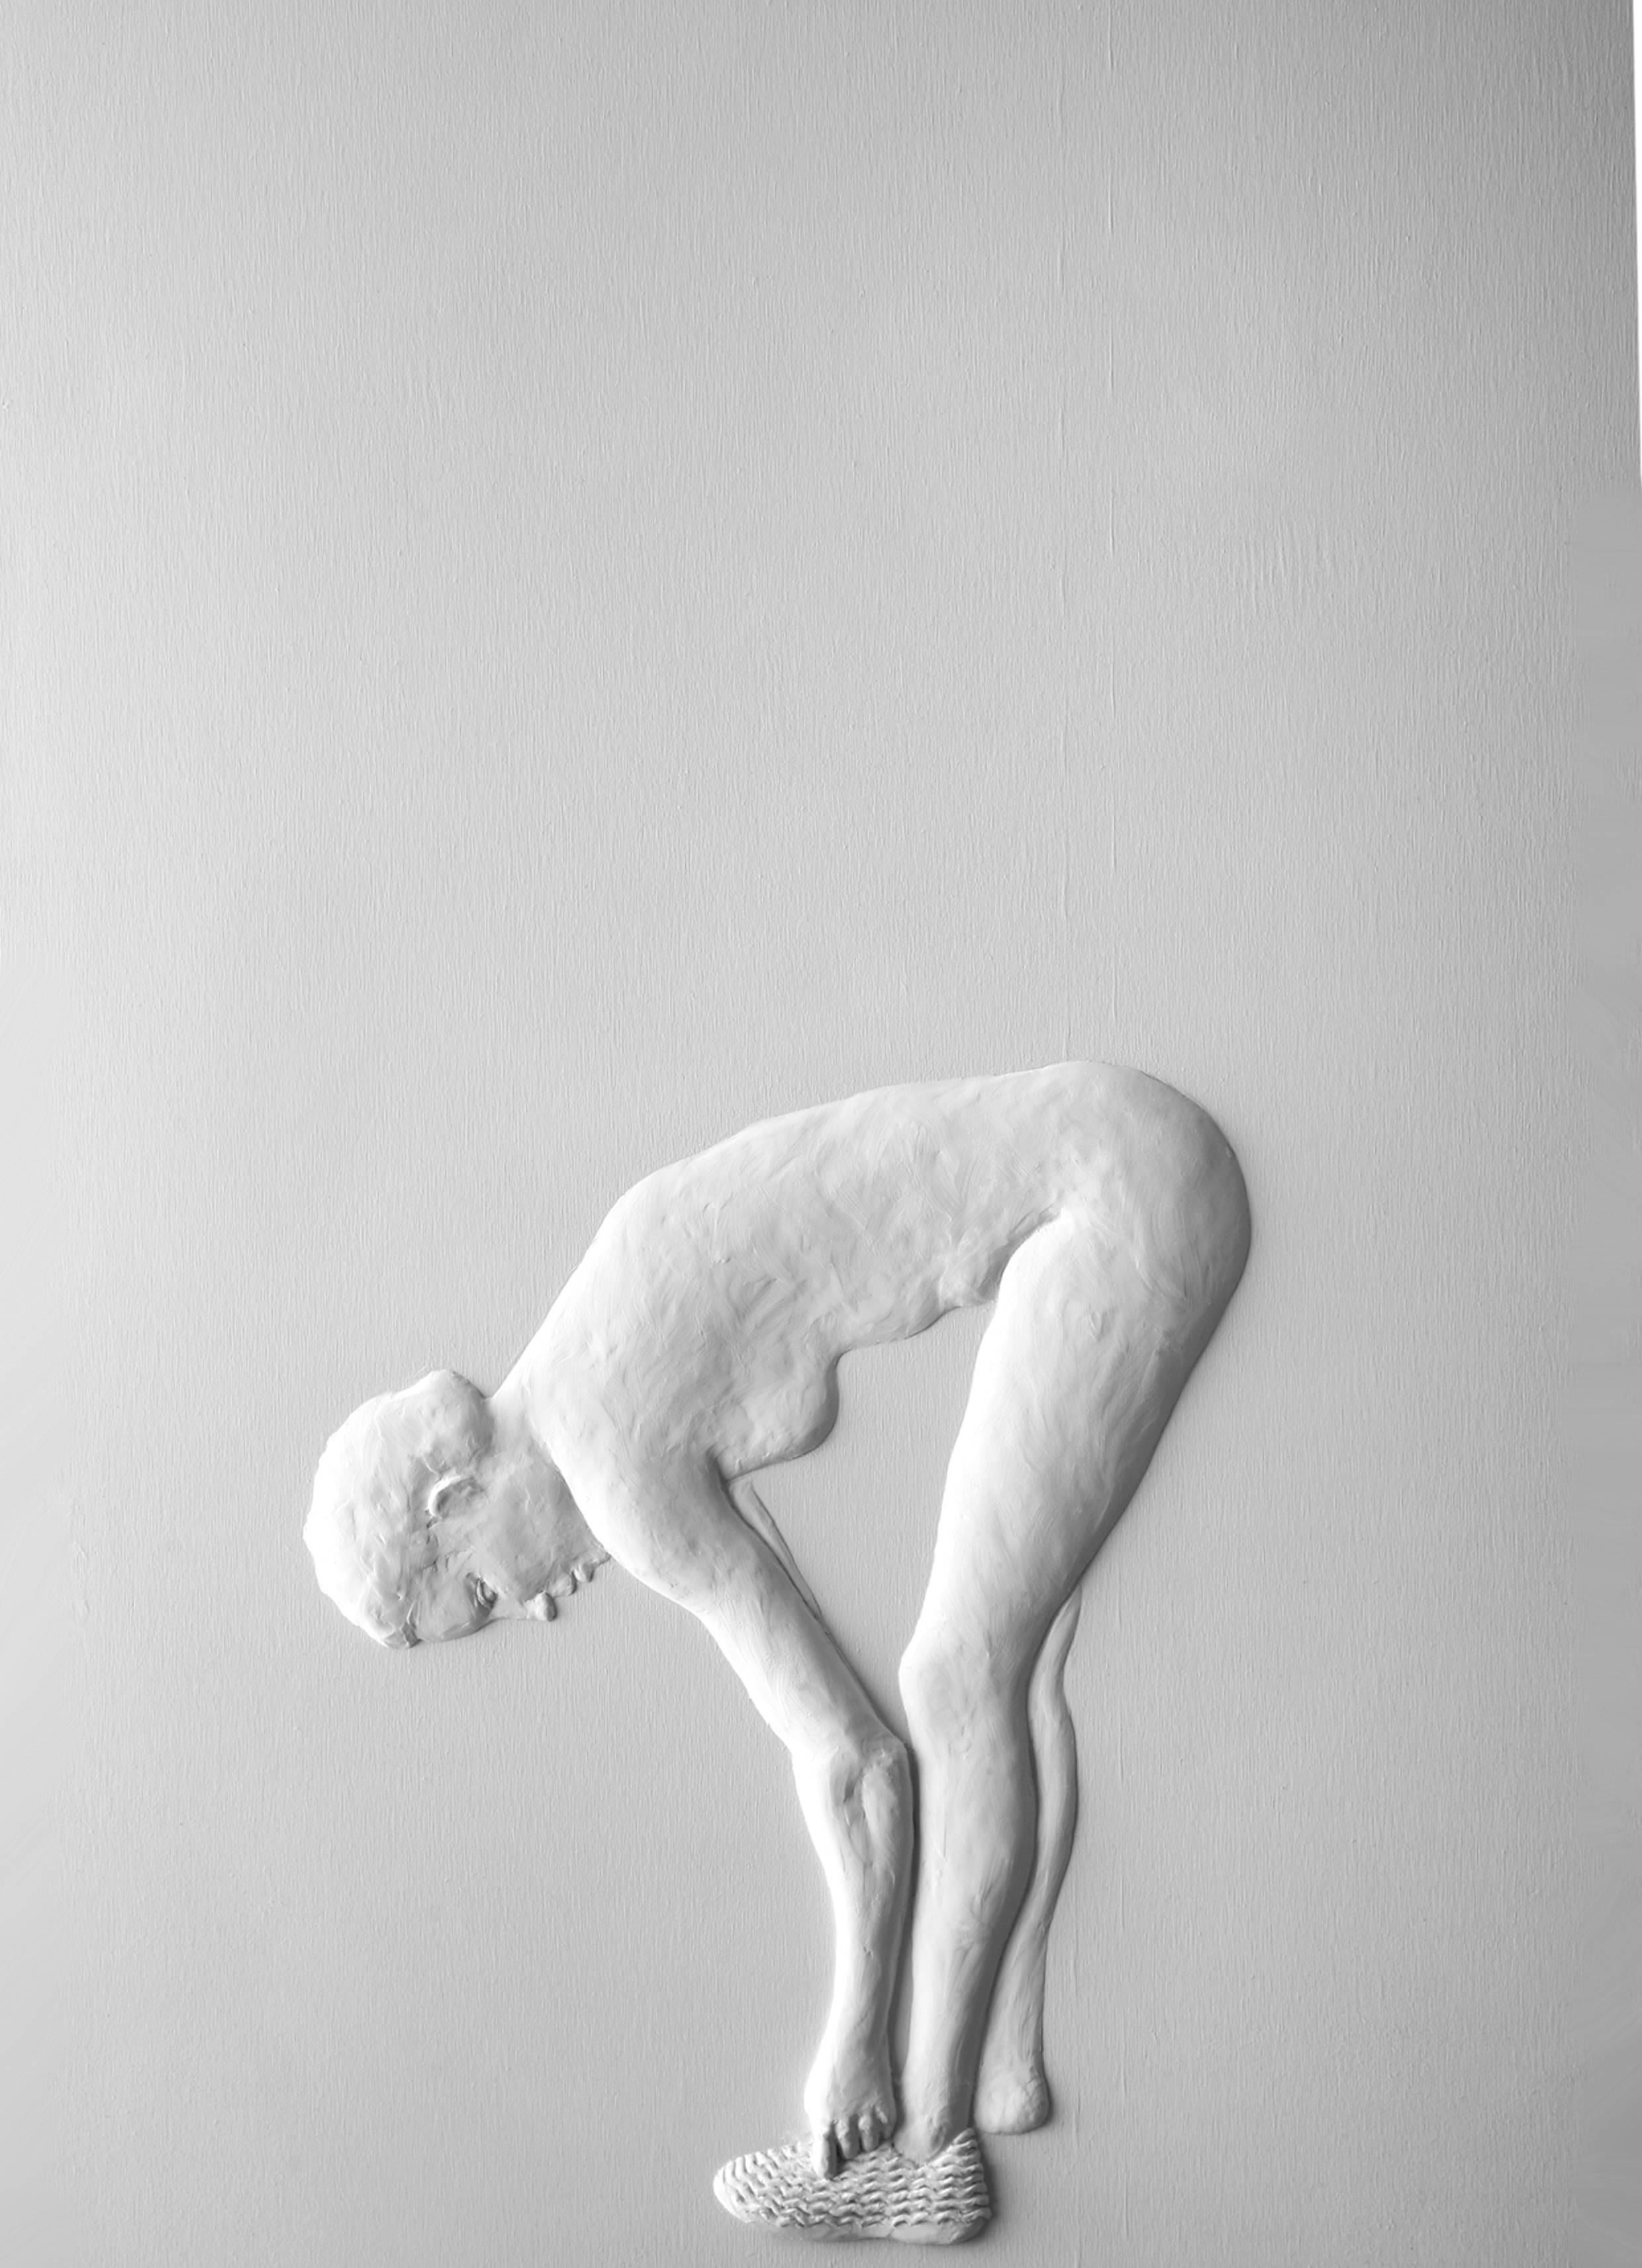 Maja Thommen Figurative Sculpture - "Miracle" Bas Relief Panel from the "Dressing" Series, 2011